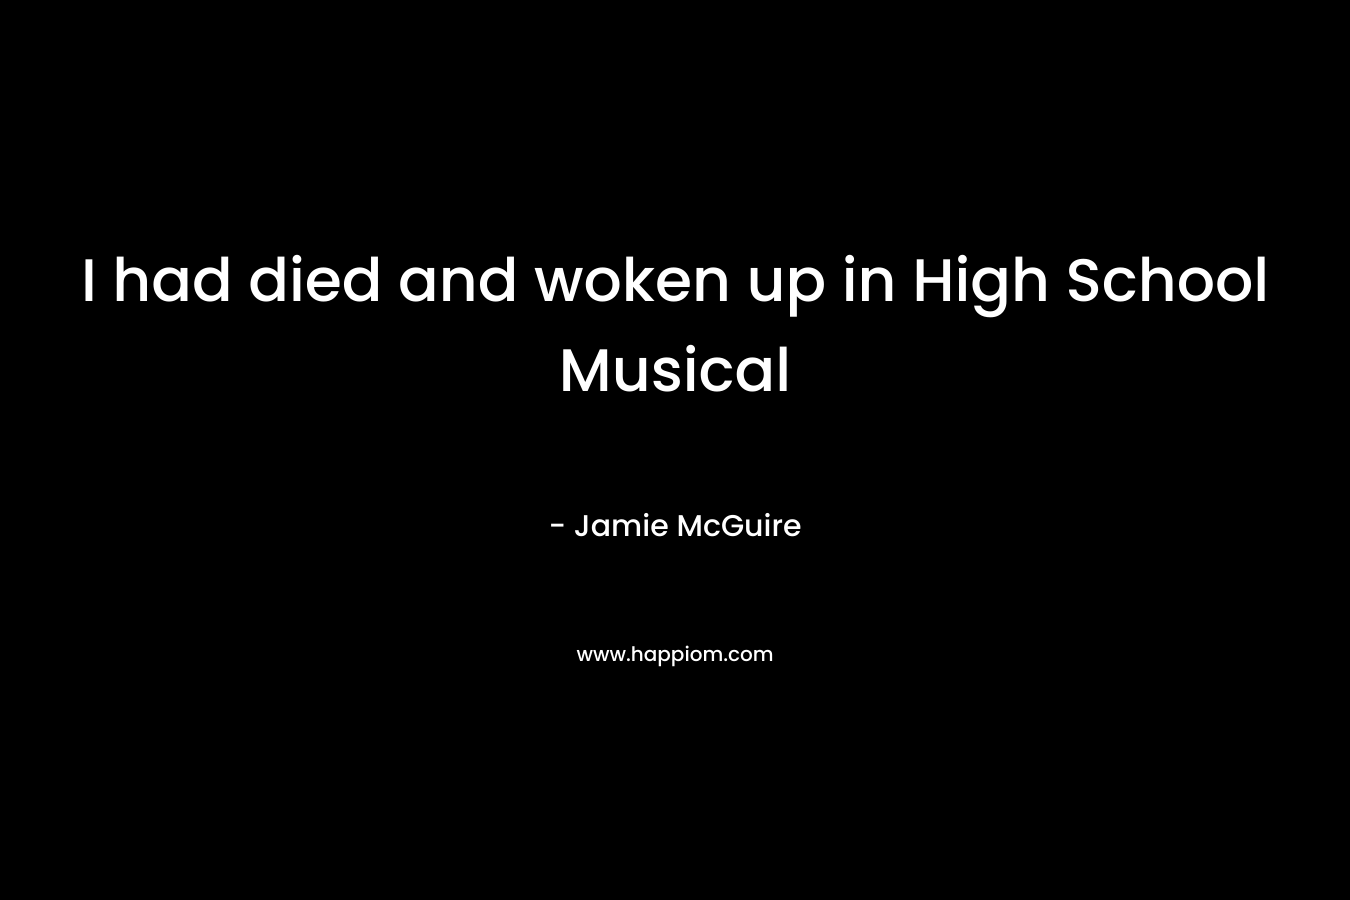 I had died and woken up in High School Musical